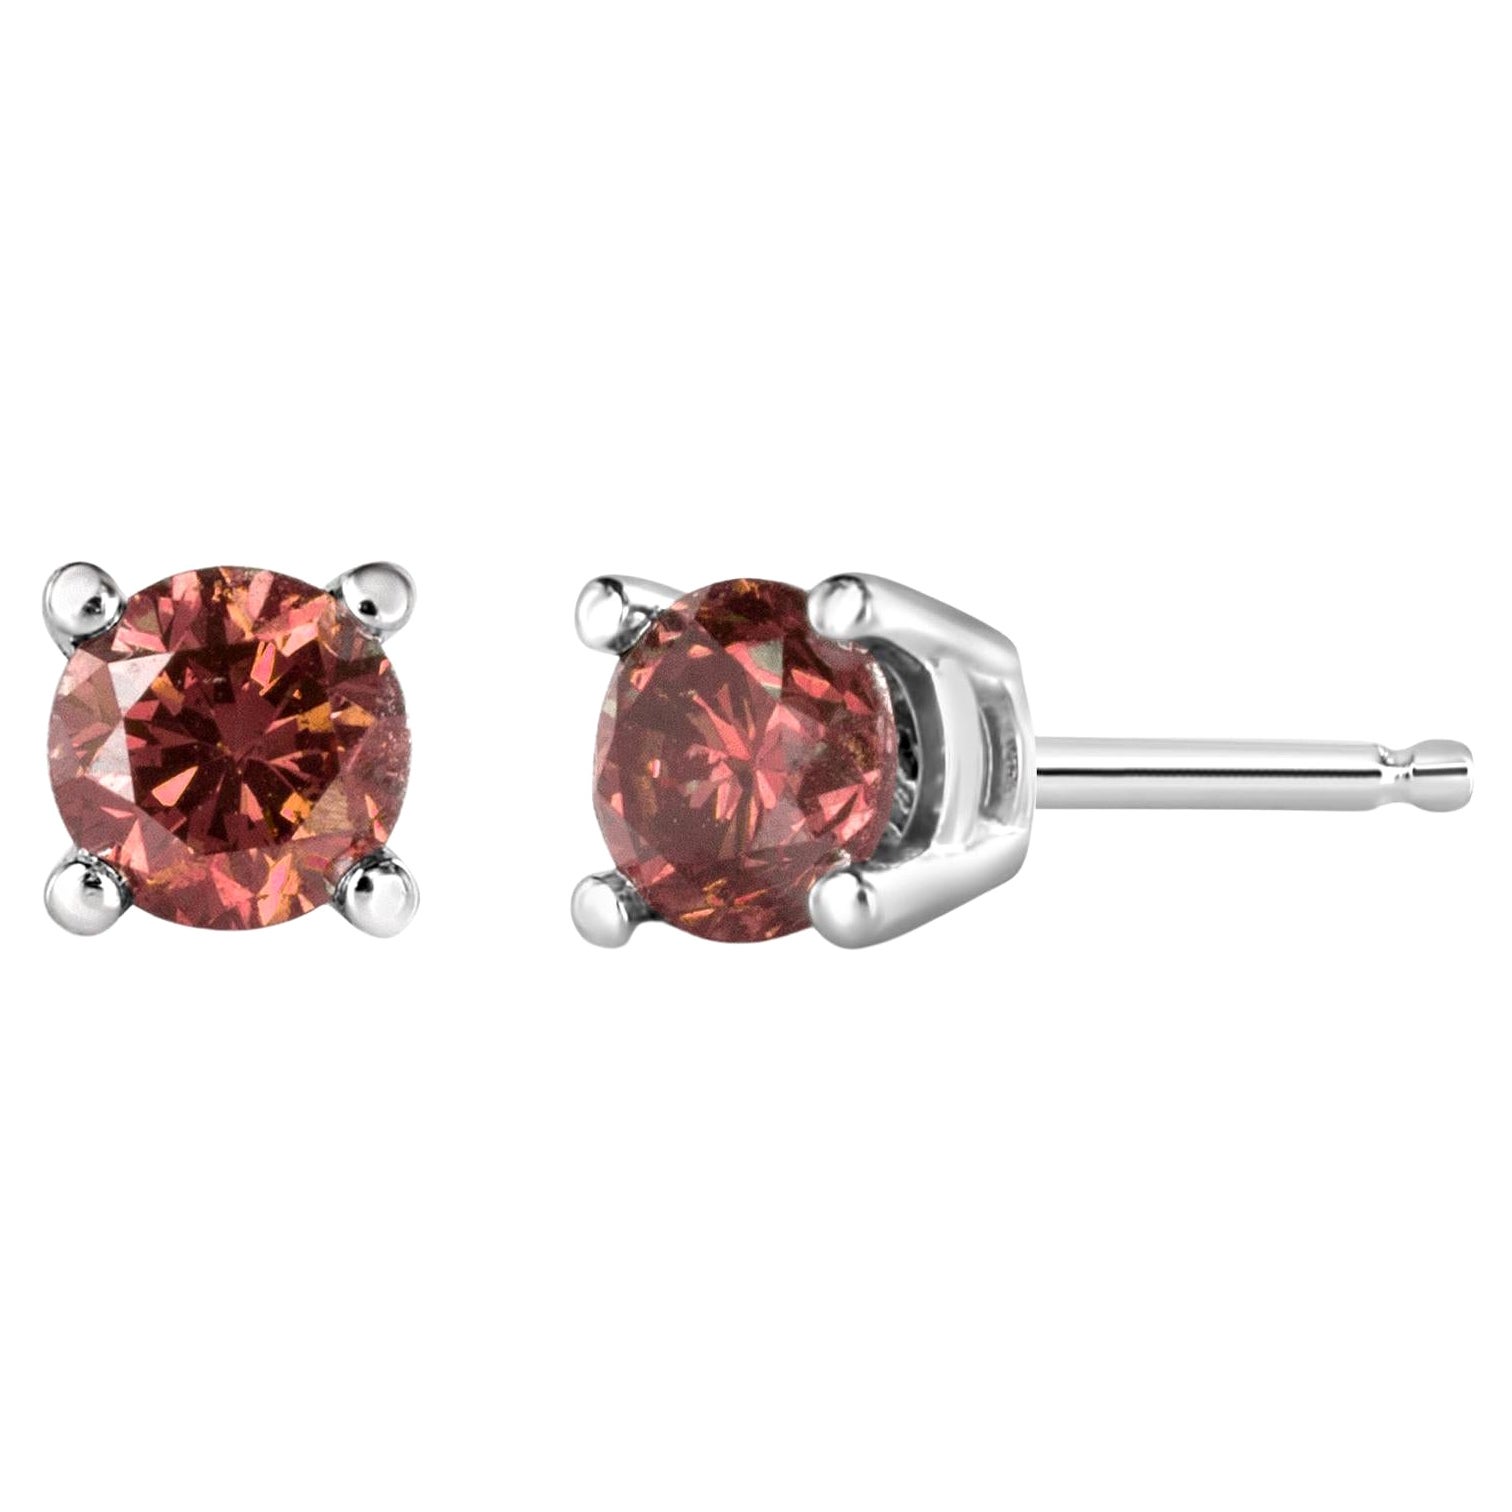 14K White Gold 1/4 Carat Round Brilliant-Cut Pink Diamond Solitaire Stud Earring For Sale